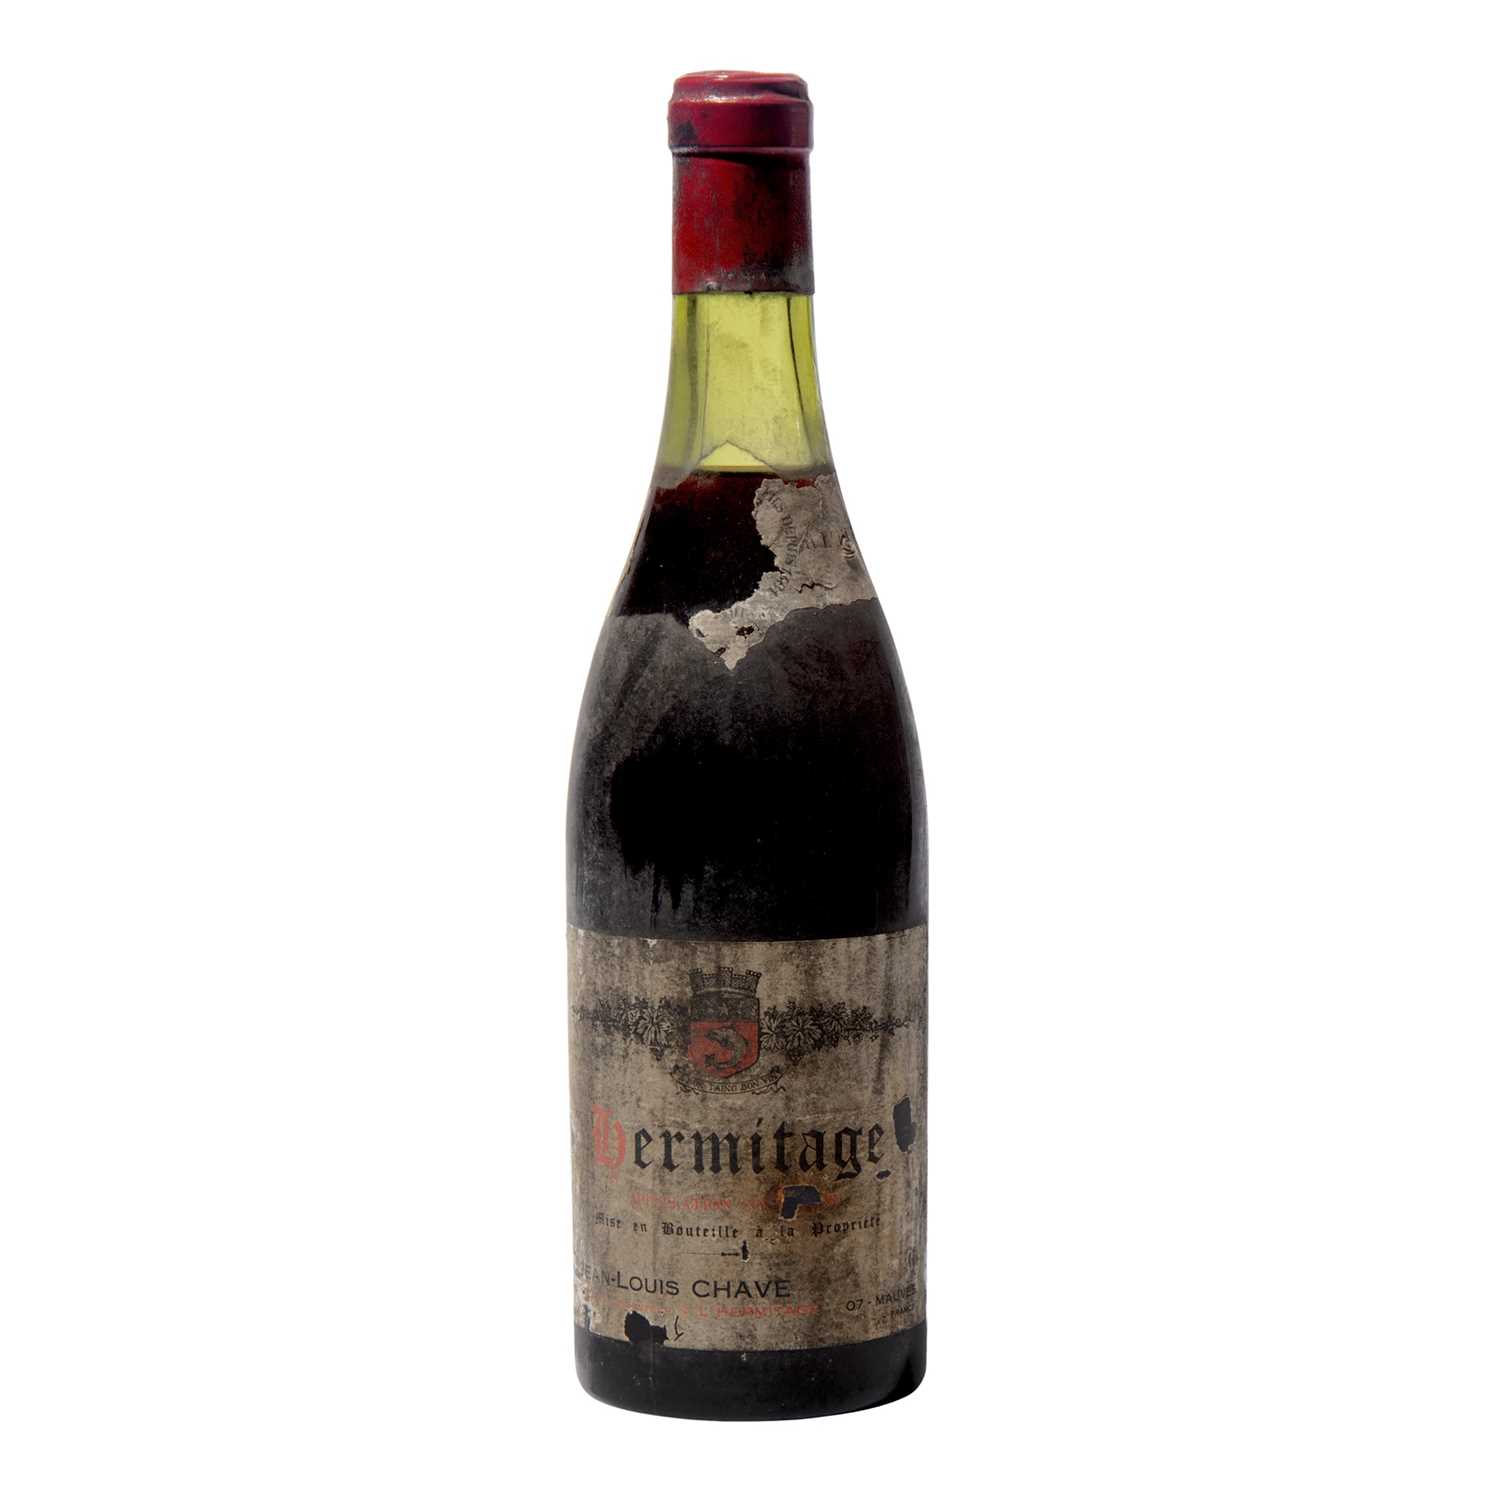 Lot 111 - 1 bottle 1967 Hermitage Chave